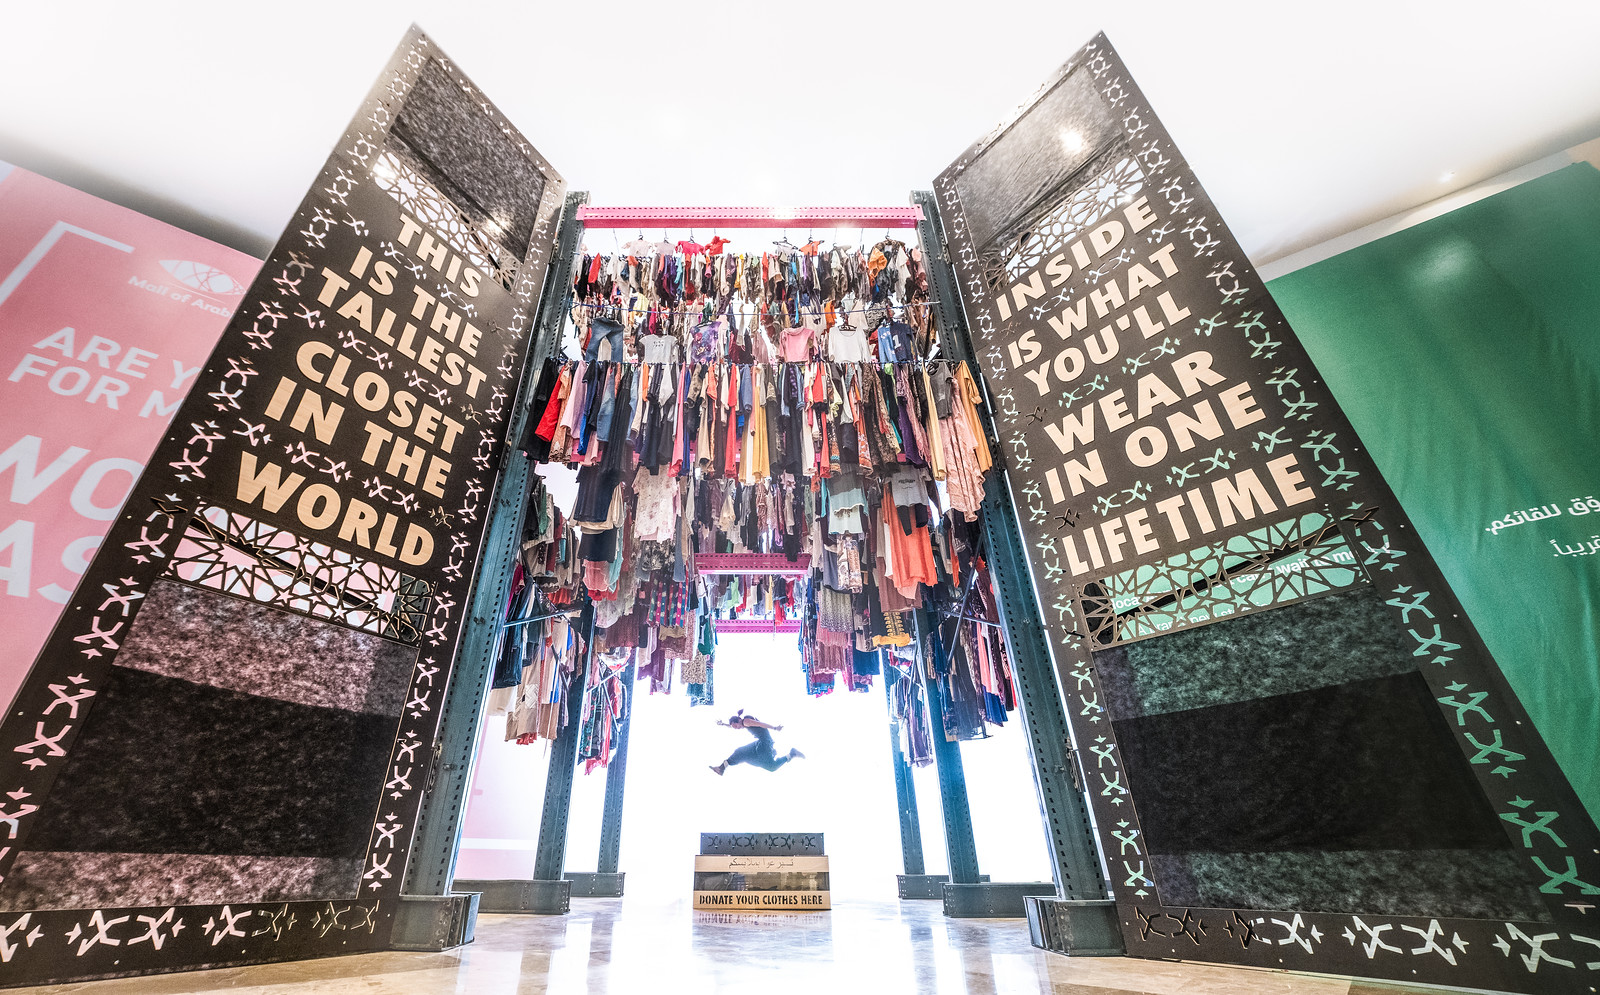 A picture featuring the giant closet with 3,000 clothing items in Egypt Von Wong posted on his blog